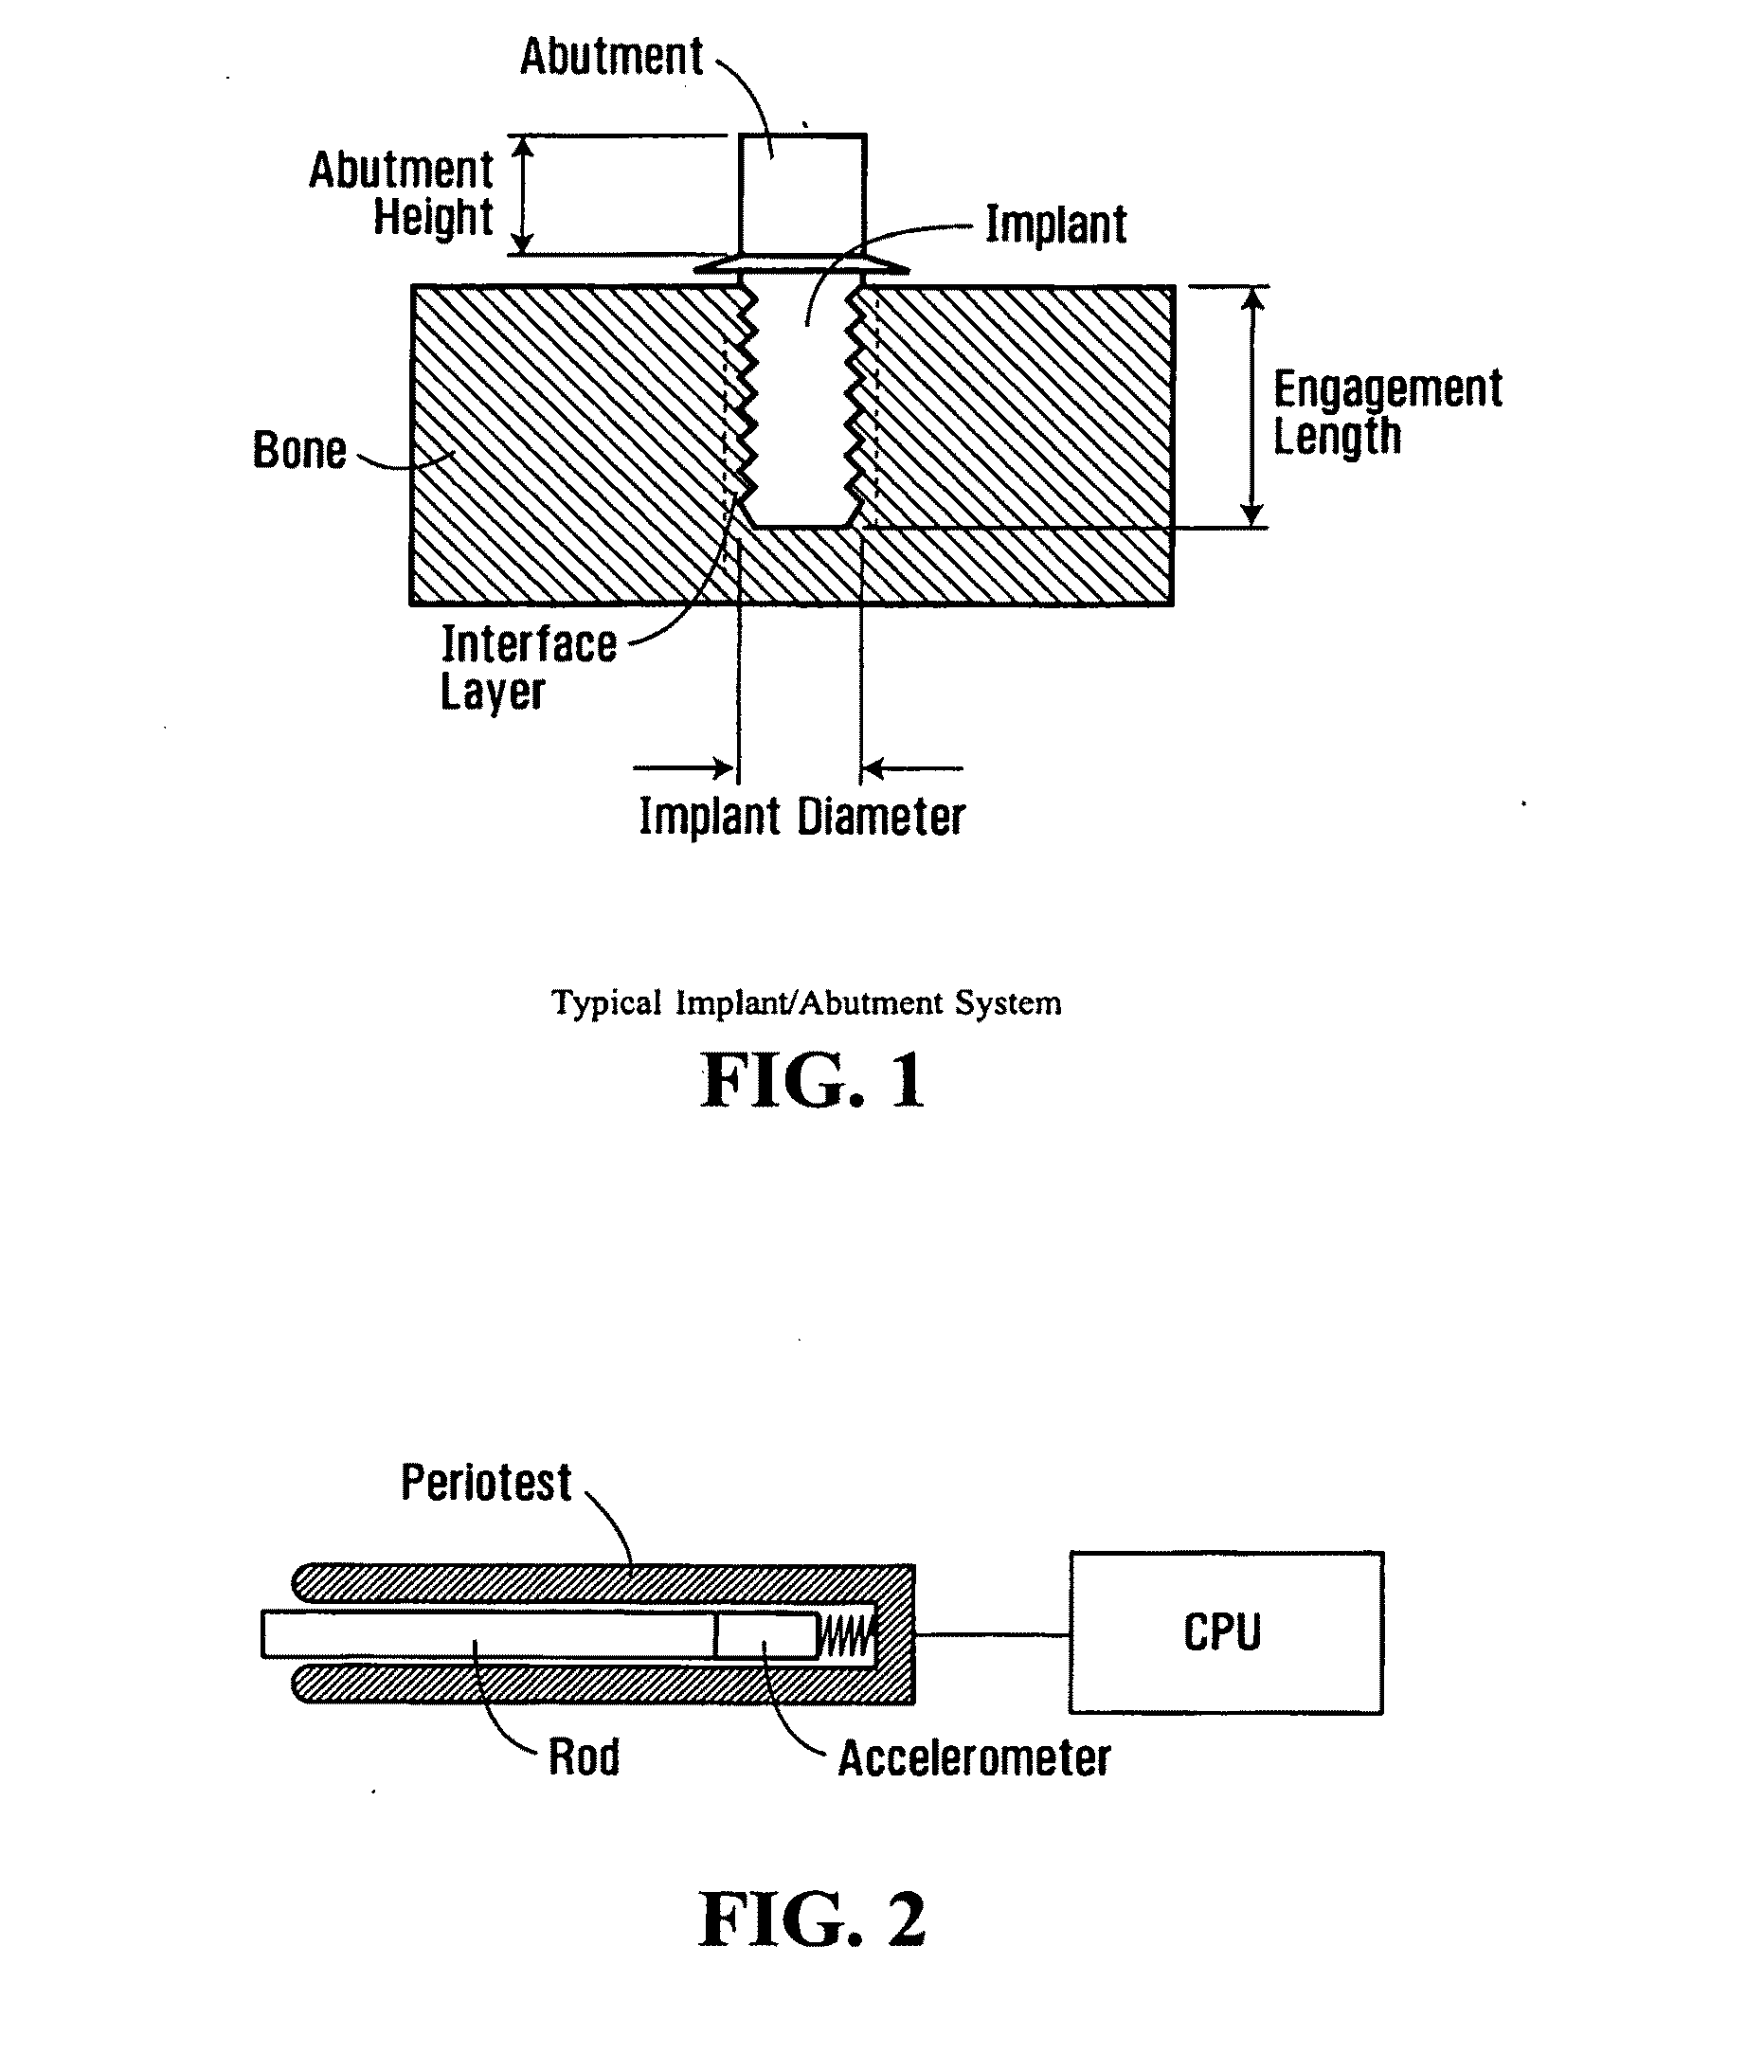 Apparatus and method for assessing percutaneous implant integrity